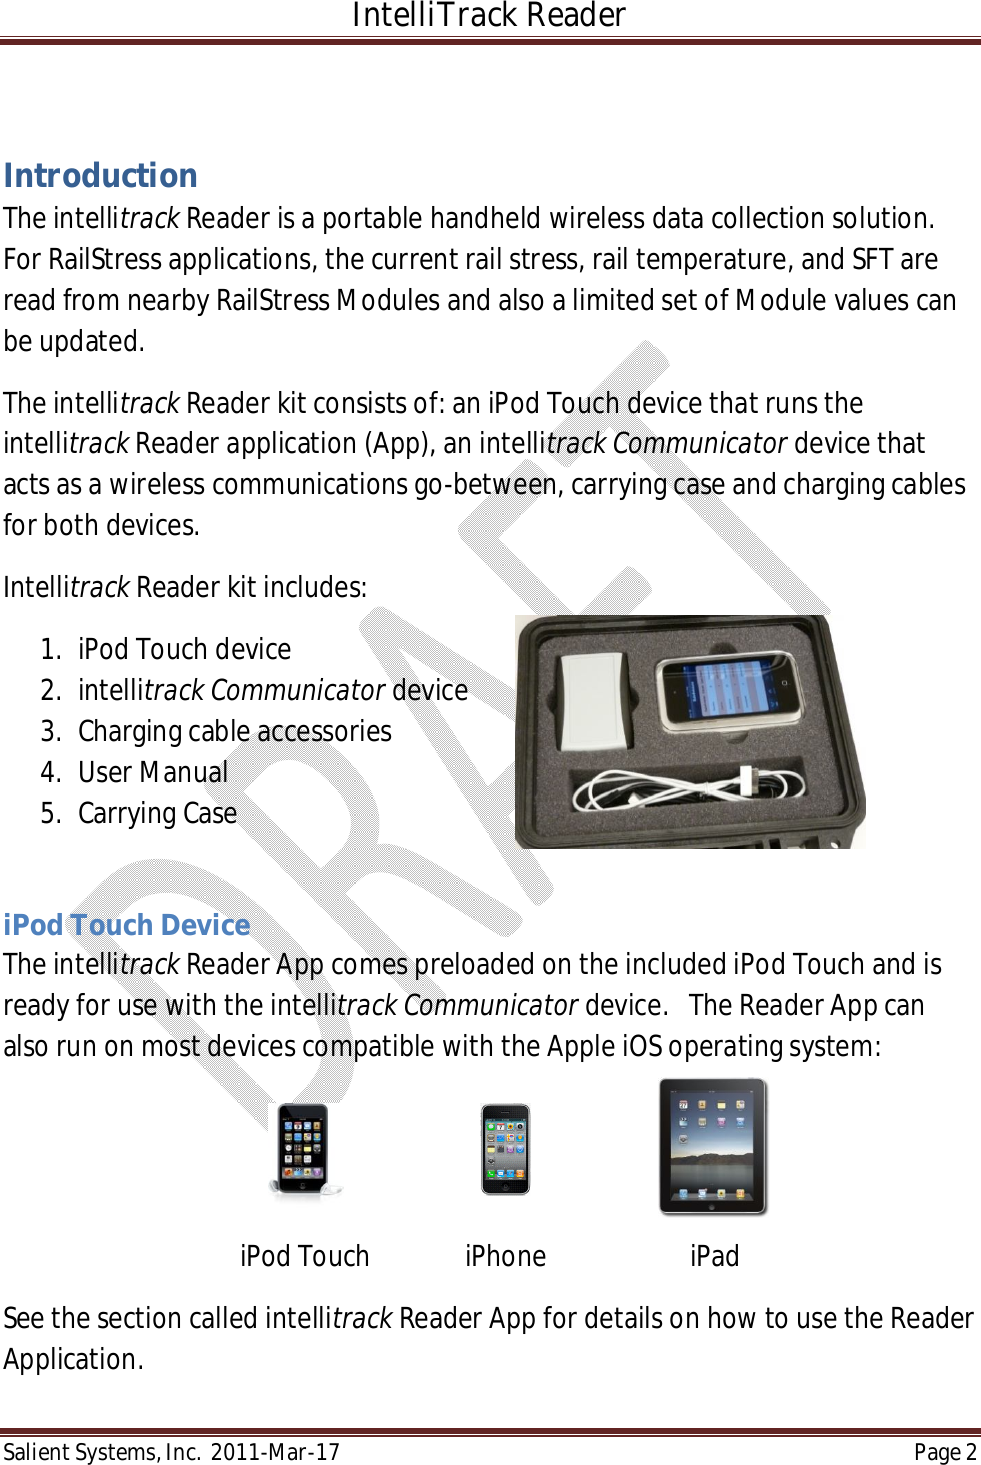 IntelliTrack Reader  Salient Systems, Inc.  2011-Mar-17 Page 2   Introduction The intellitrack Reader is a portable handheld wireless data collection solution.  For RailStress applications, the current rail stress, rail temperature, and SFT are read from nearby RailStress Modules and also a limited set of Module values can be updated.  The intellitrack Reader kit consists of: an iPod Touch device that runs the intellitrack Reader application (App), an intellitrack Communicator device that acts as a wireless communications go-between, carrying case and charging cables for both devices.  Intellitrack Reader kit includes: 1. iPod Touch device 2. intellitrack Communicator device 3. Charging cable accessories 4. User Manual 5. Carrying Case  iPod Touch Device The intellitrack Reader App comes preloaded on the included iPod Touch and is ready for use with the intellitrack Communicator device.   The Reader App can also run on most devices compatible with the Apple iOS operating system:    iPod Touch    iPhone    iPad See the section called intellitrack Reader App for details on how to use the Reader Application.